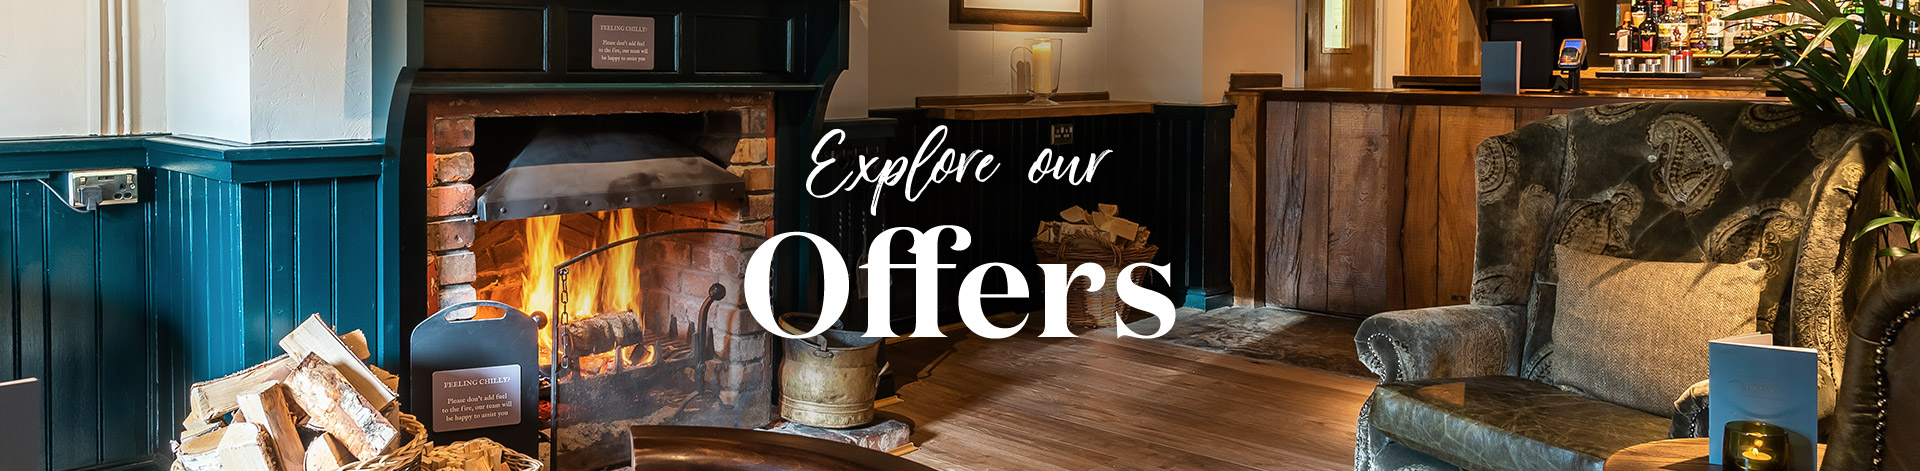 Our latest offers at The Fox and Roman